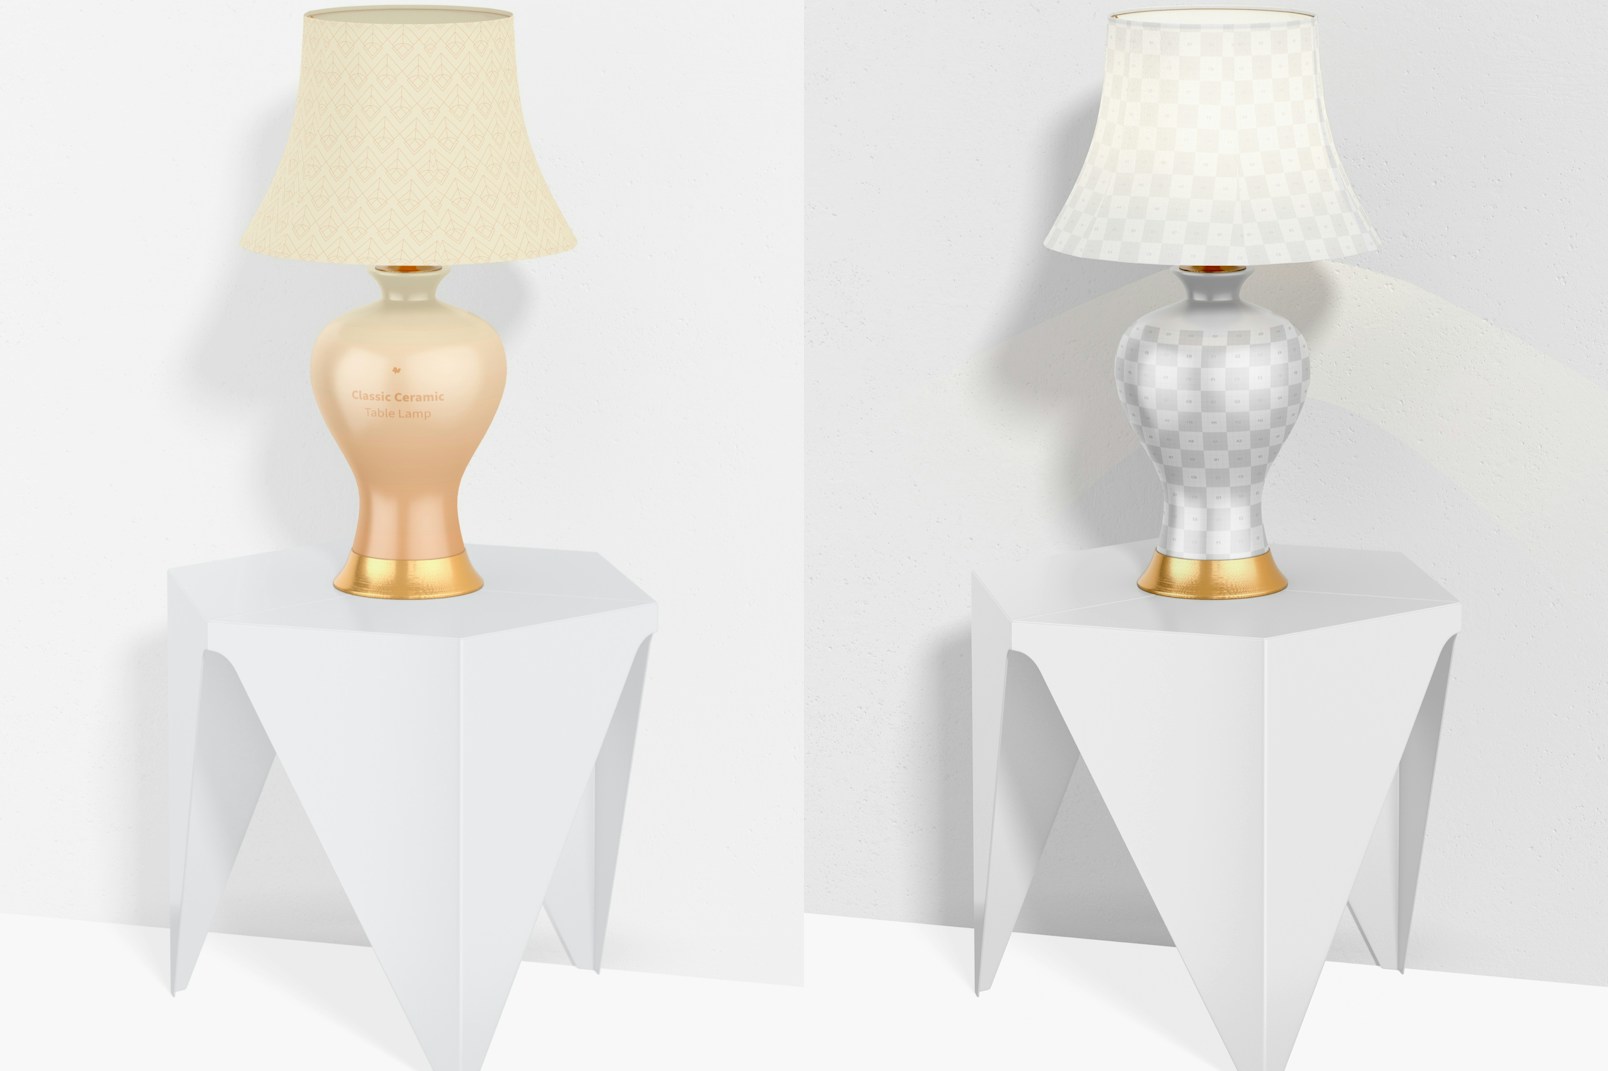 Classic Ceramic Table Lamp on a Table Mockup